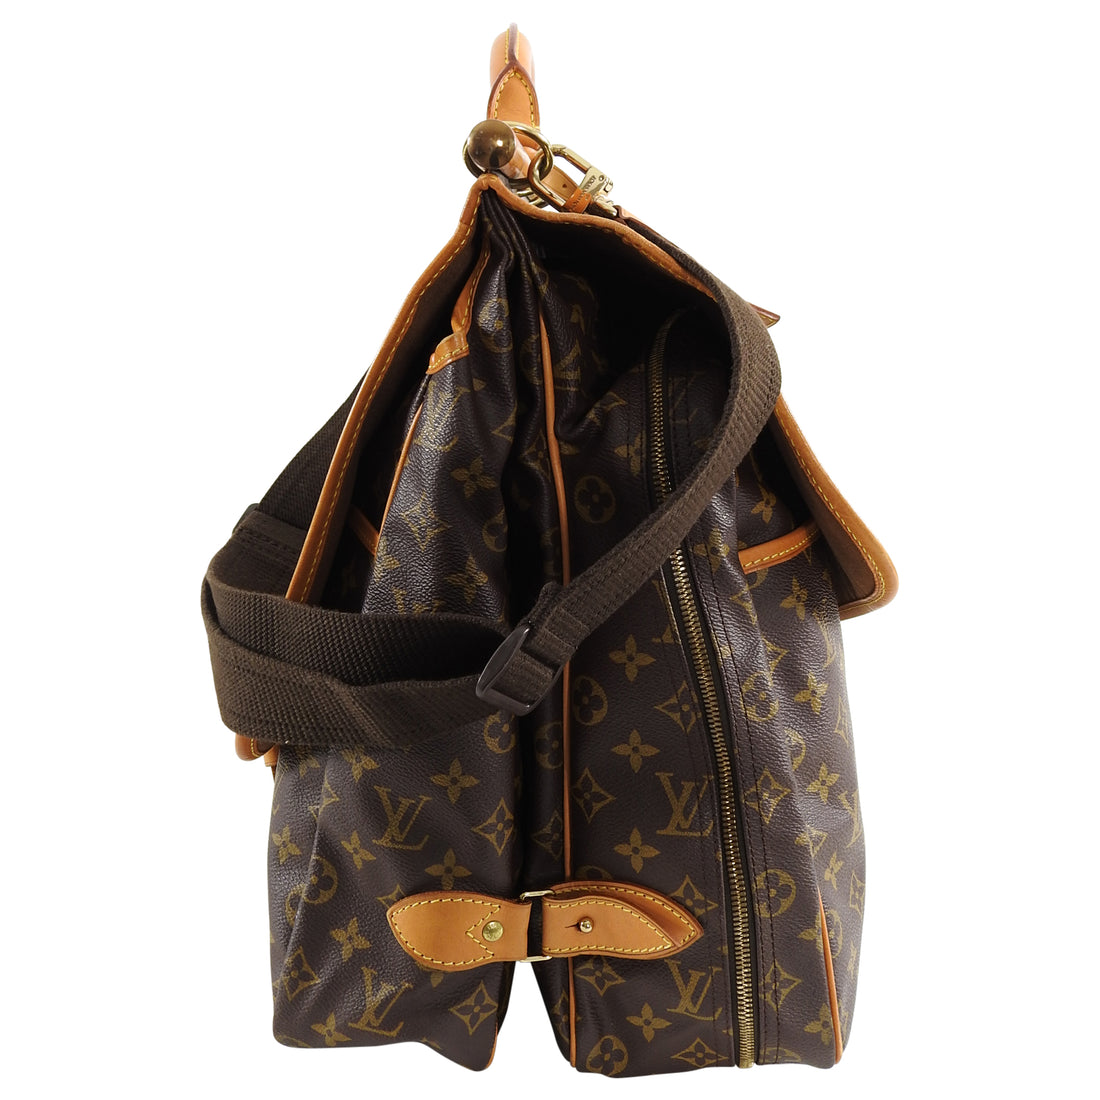 Sold at Auction: Hunting Sac Chasse Travel Bag, Louis Vuitton